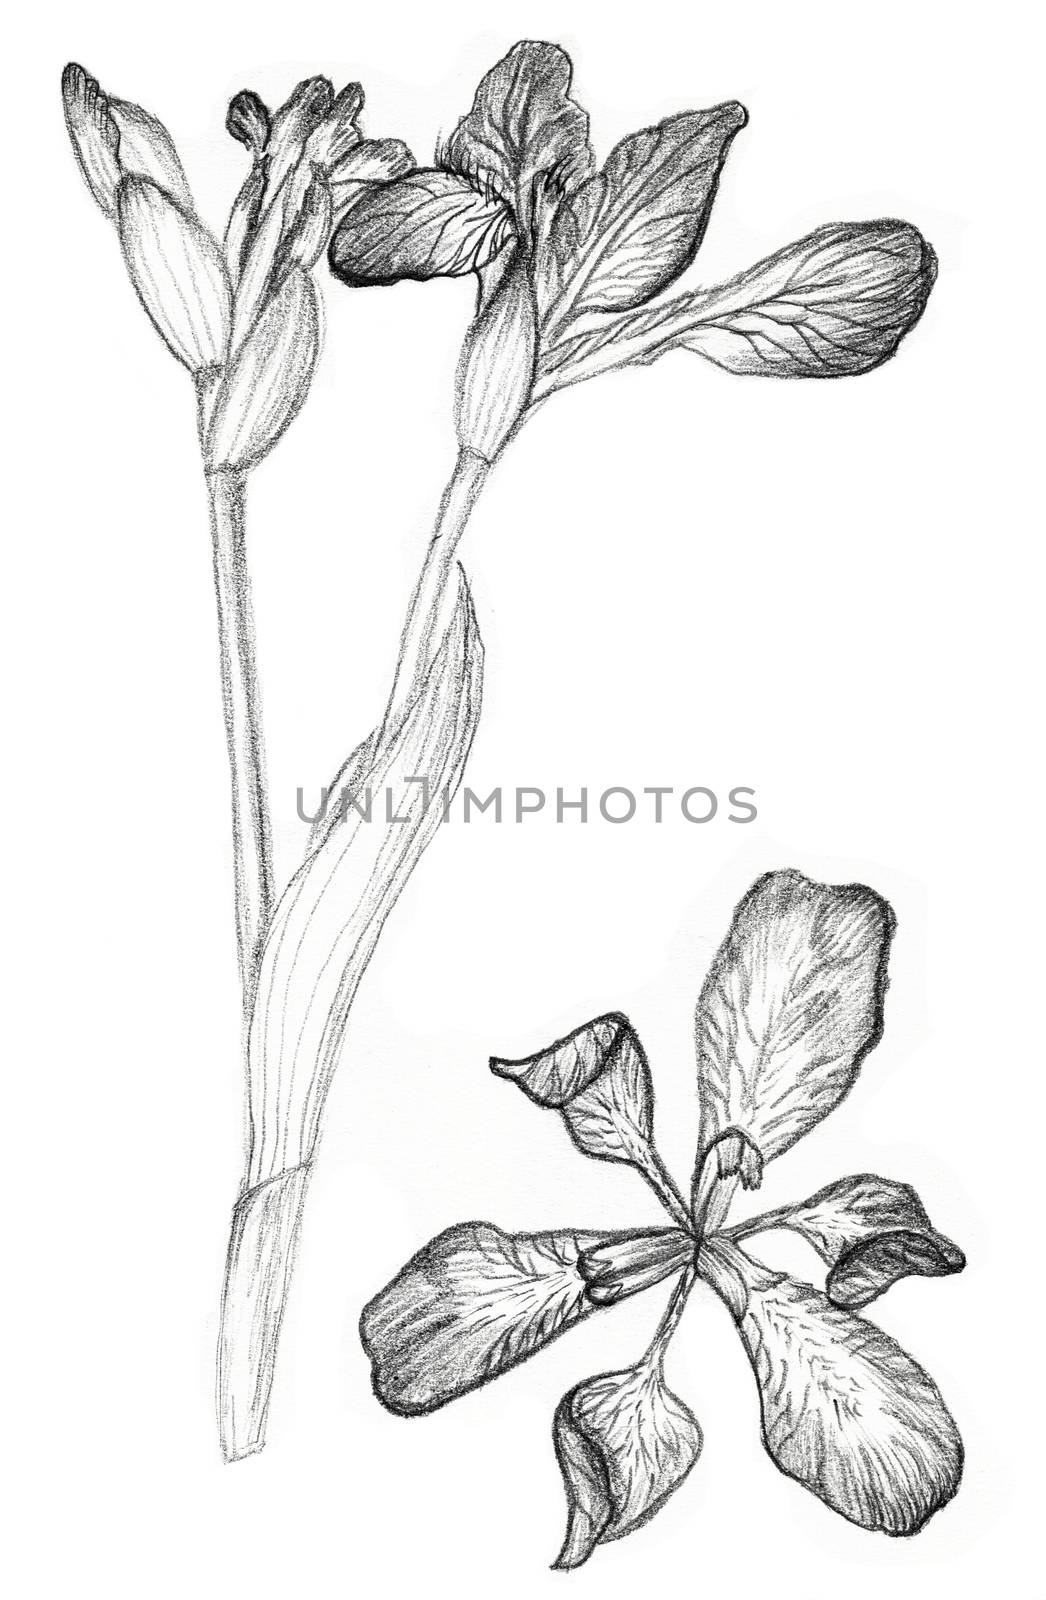 Iris flower drawing on white background. Fast pencil sketch